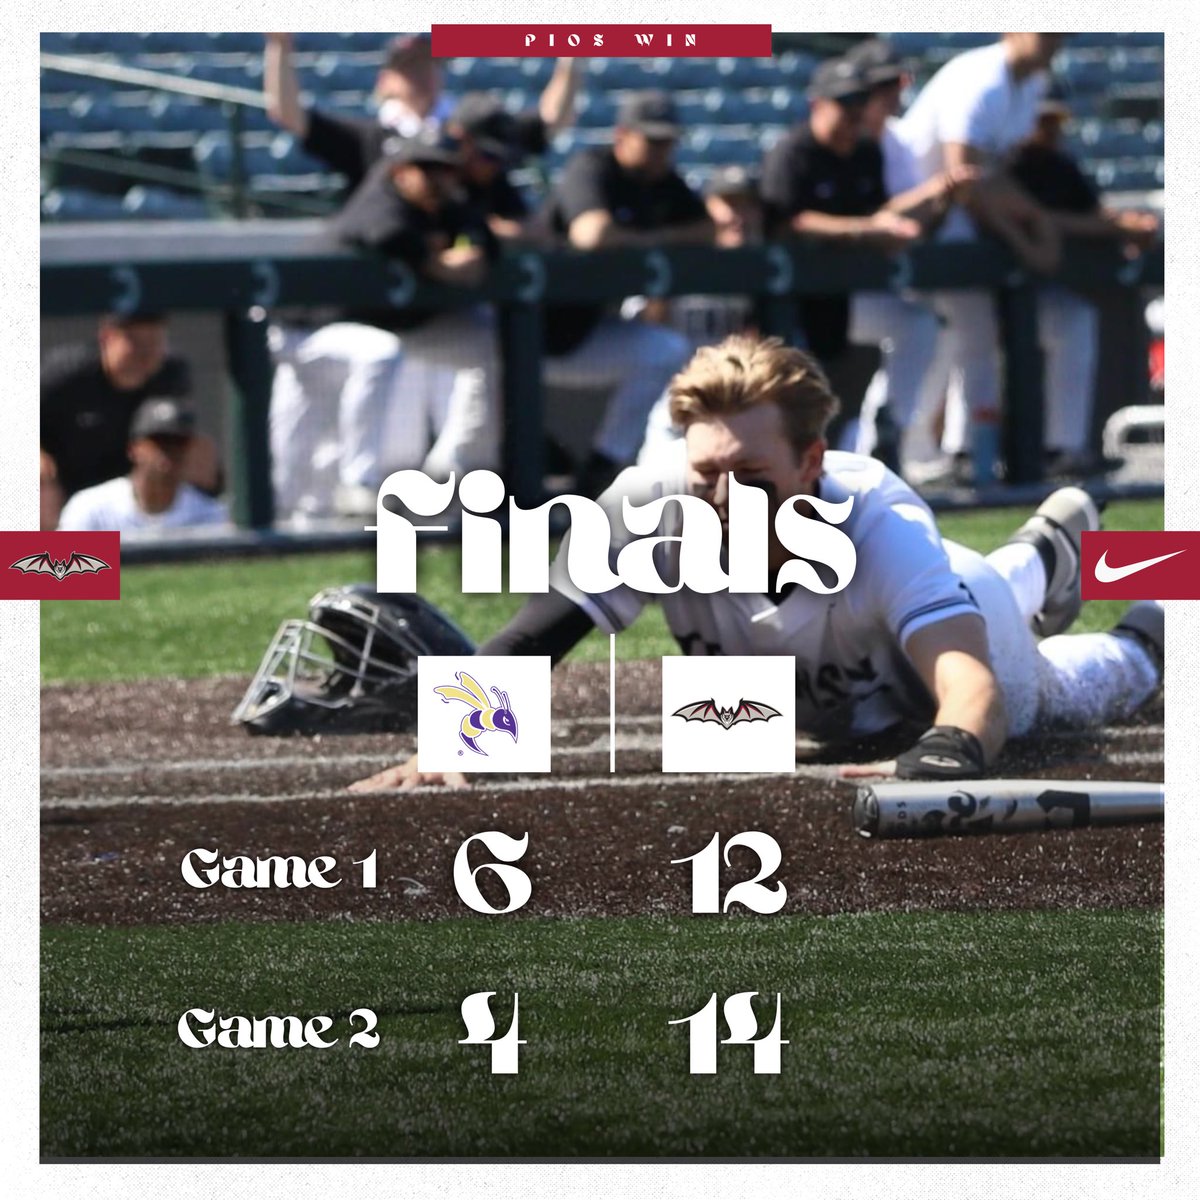 RT if you’ve heard this one before…. PIOS WIN❗️❗️ We’ll go for the sweep tomorrow! #FlyPios🦇